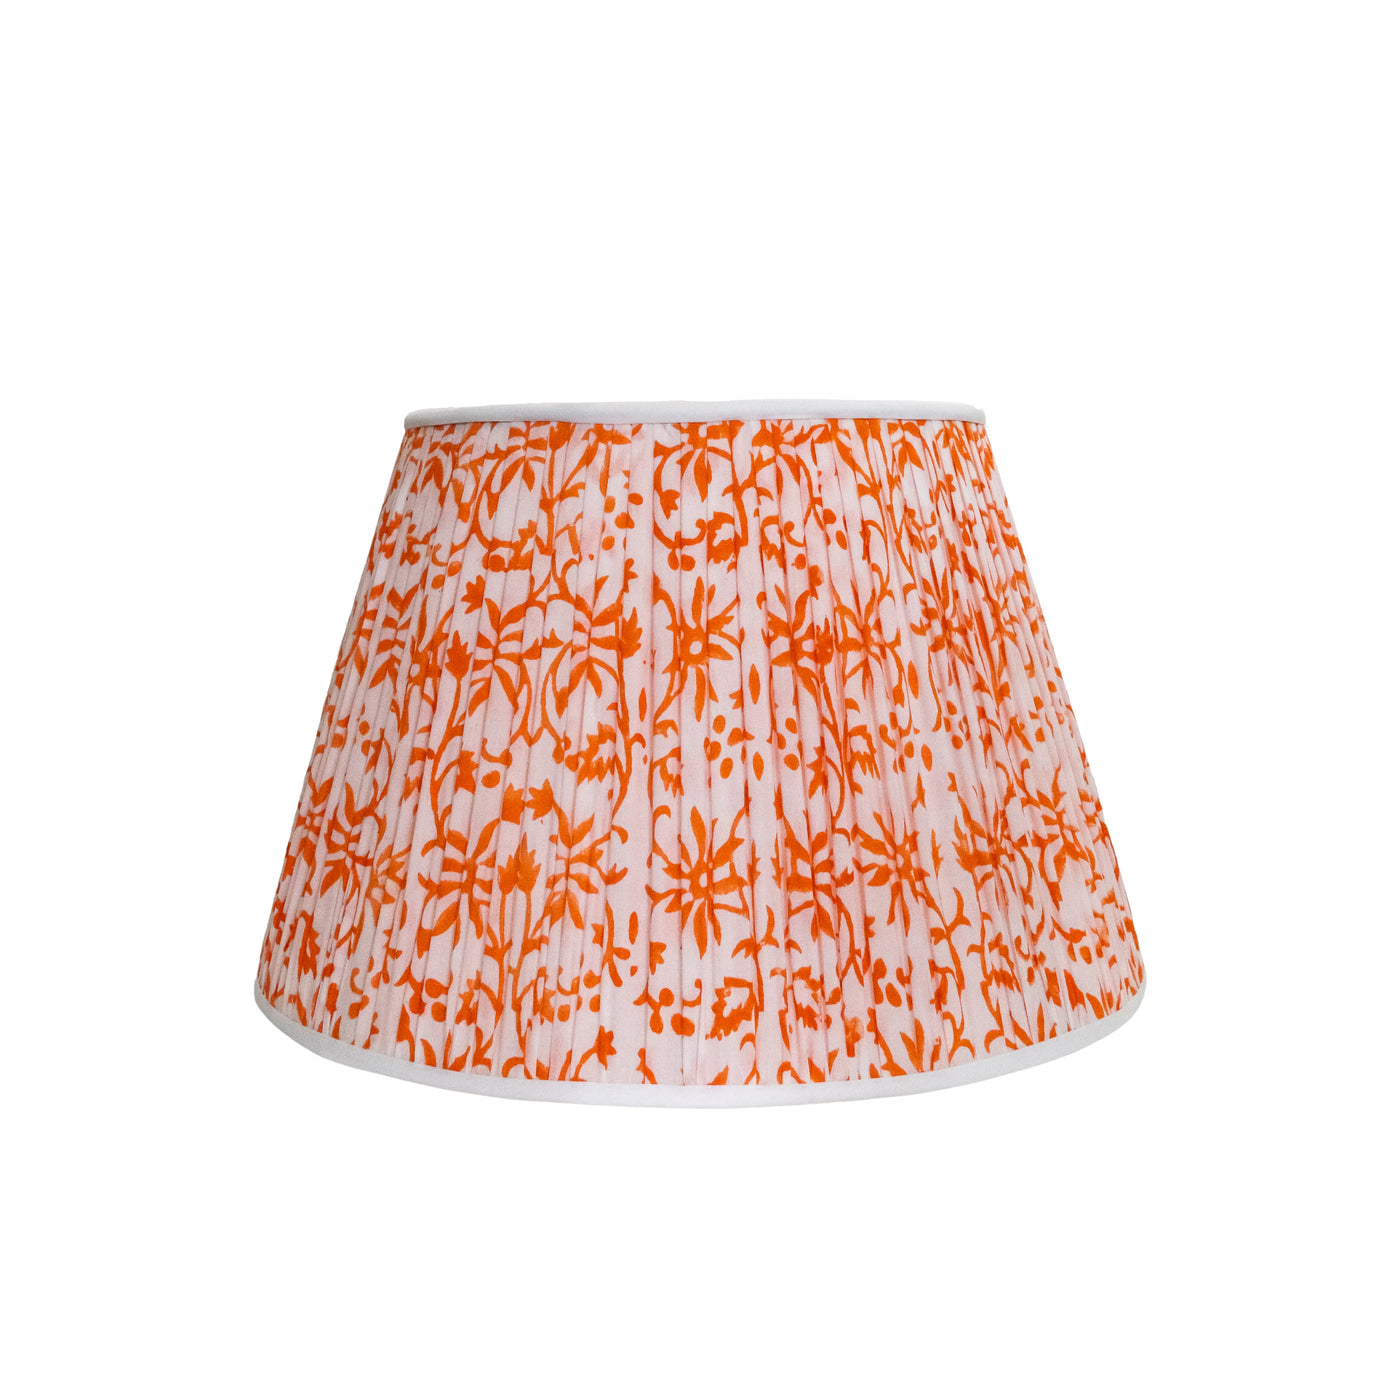 16" Coral & White Patterned & Pleated Lampshade LAST CALL | Newport Lamp And Shade | Located in Newport, RI